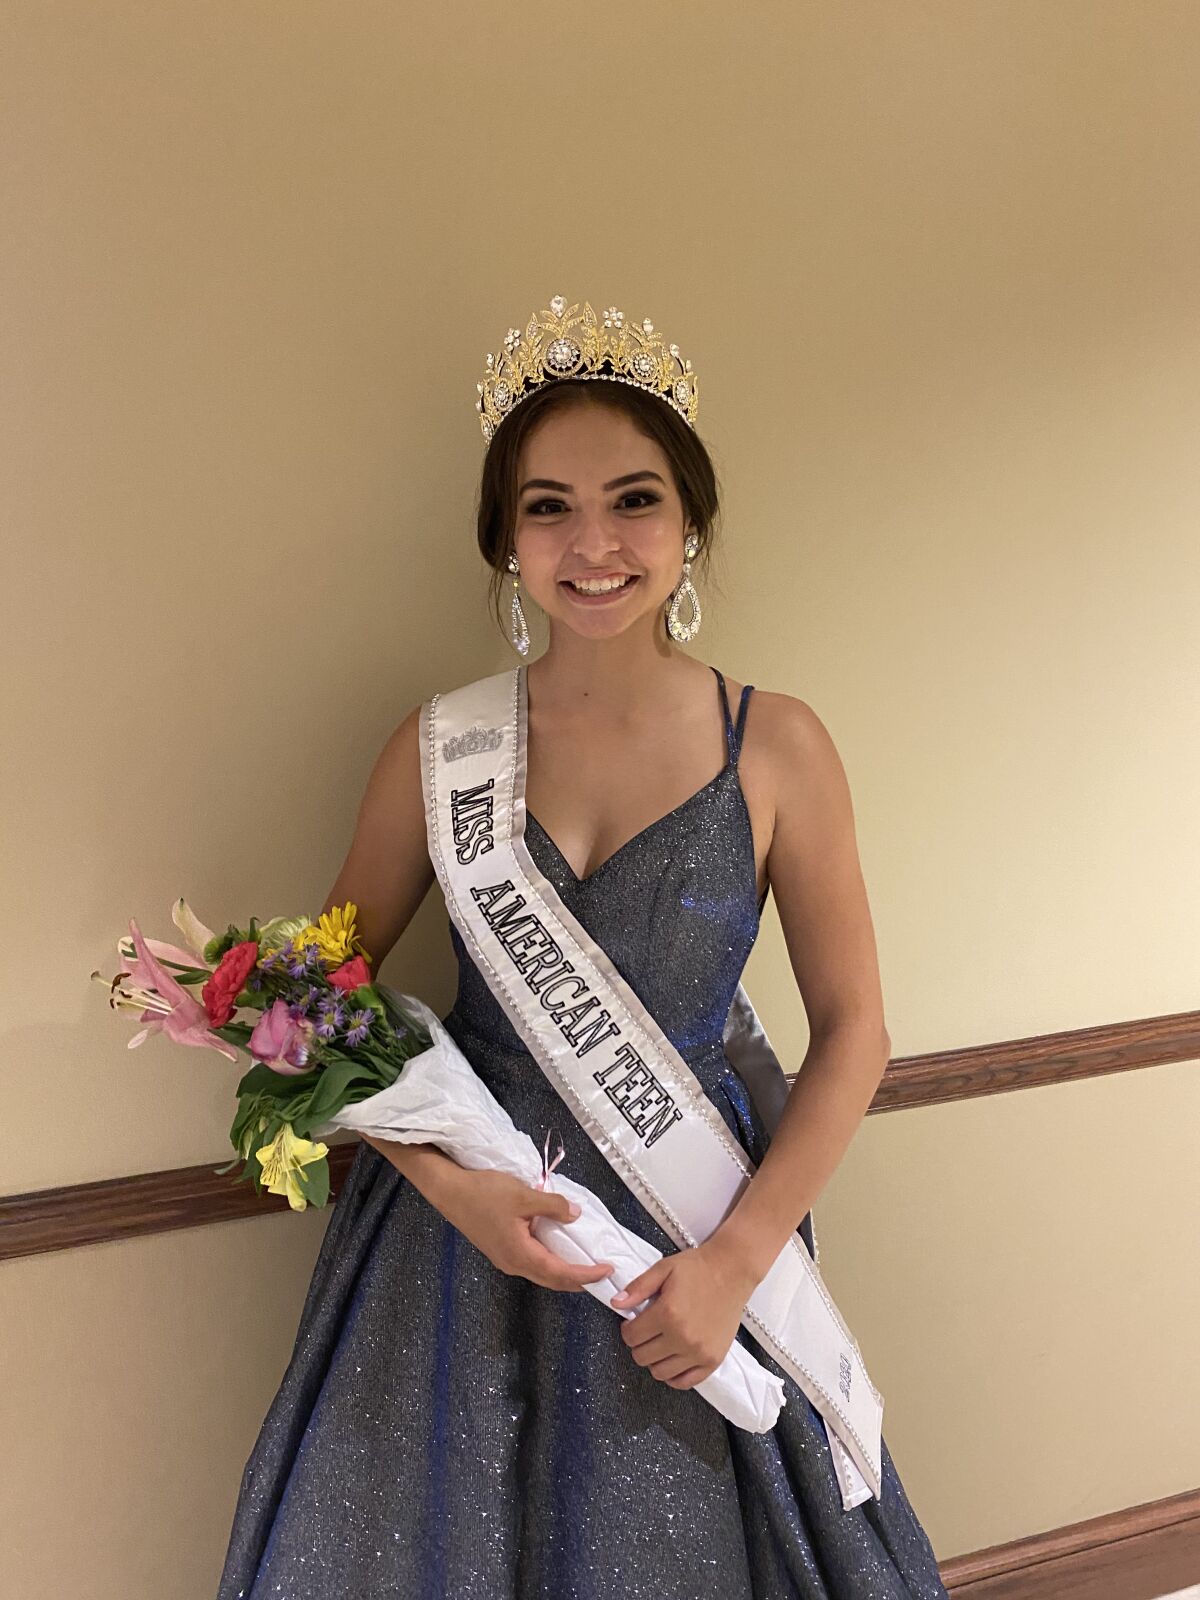 Jenna Rain Hernandez, an incoming senior at La Jolla Country Day School, is the 2020 Miss American Teen pageant winner.